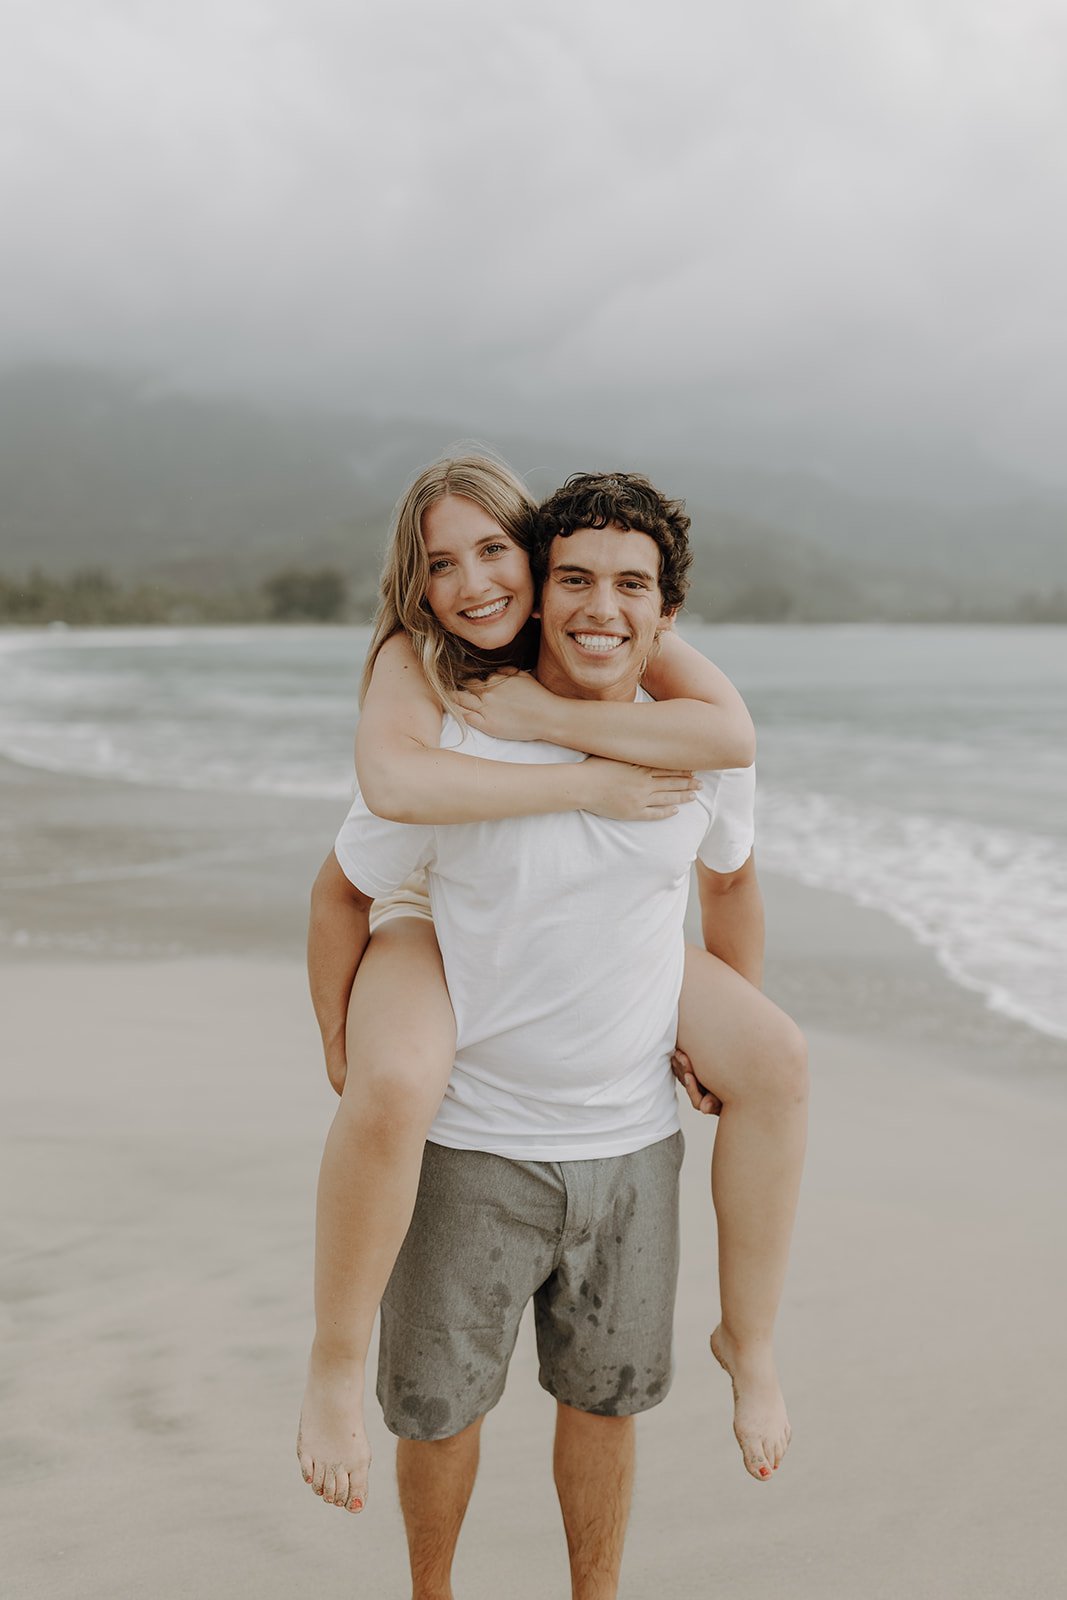 Woman riding on man's back during engagement photo session in Kauai